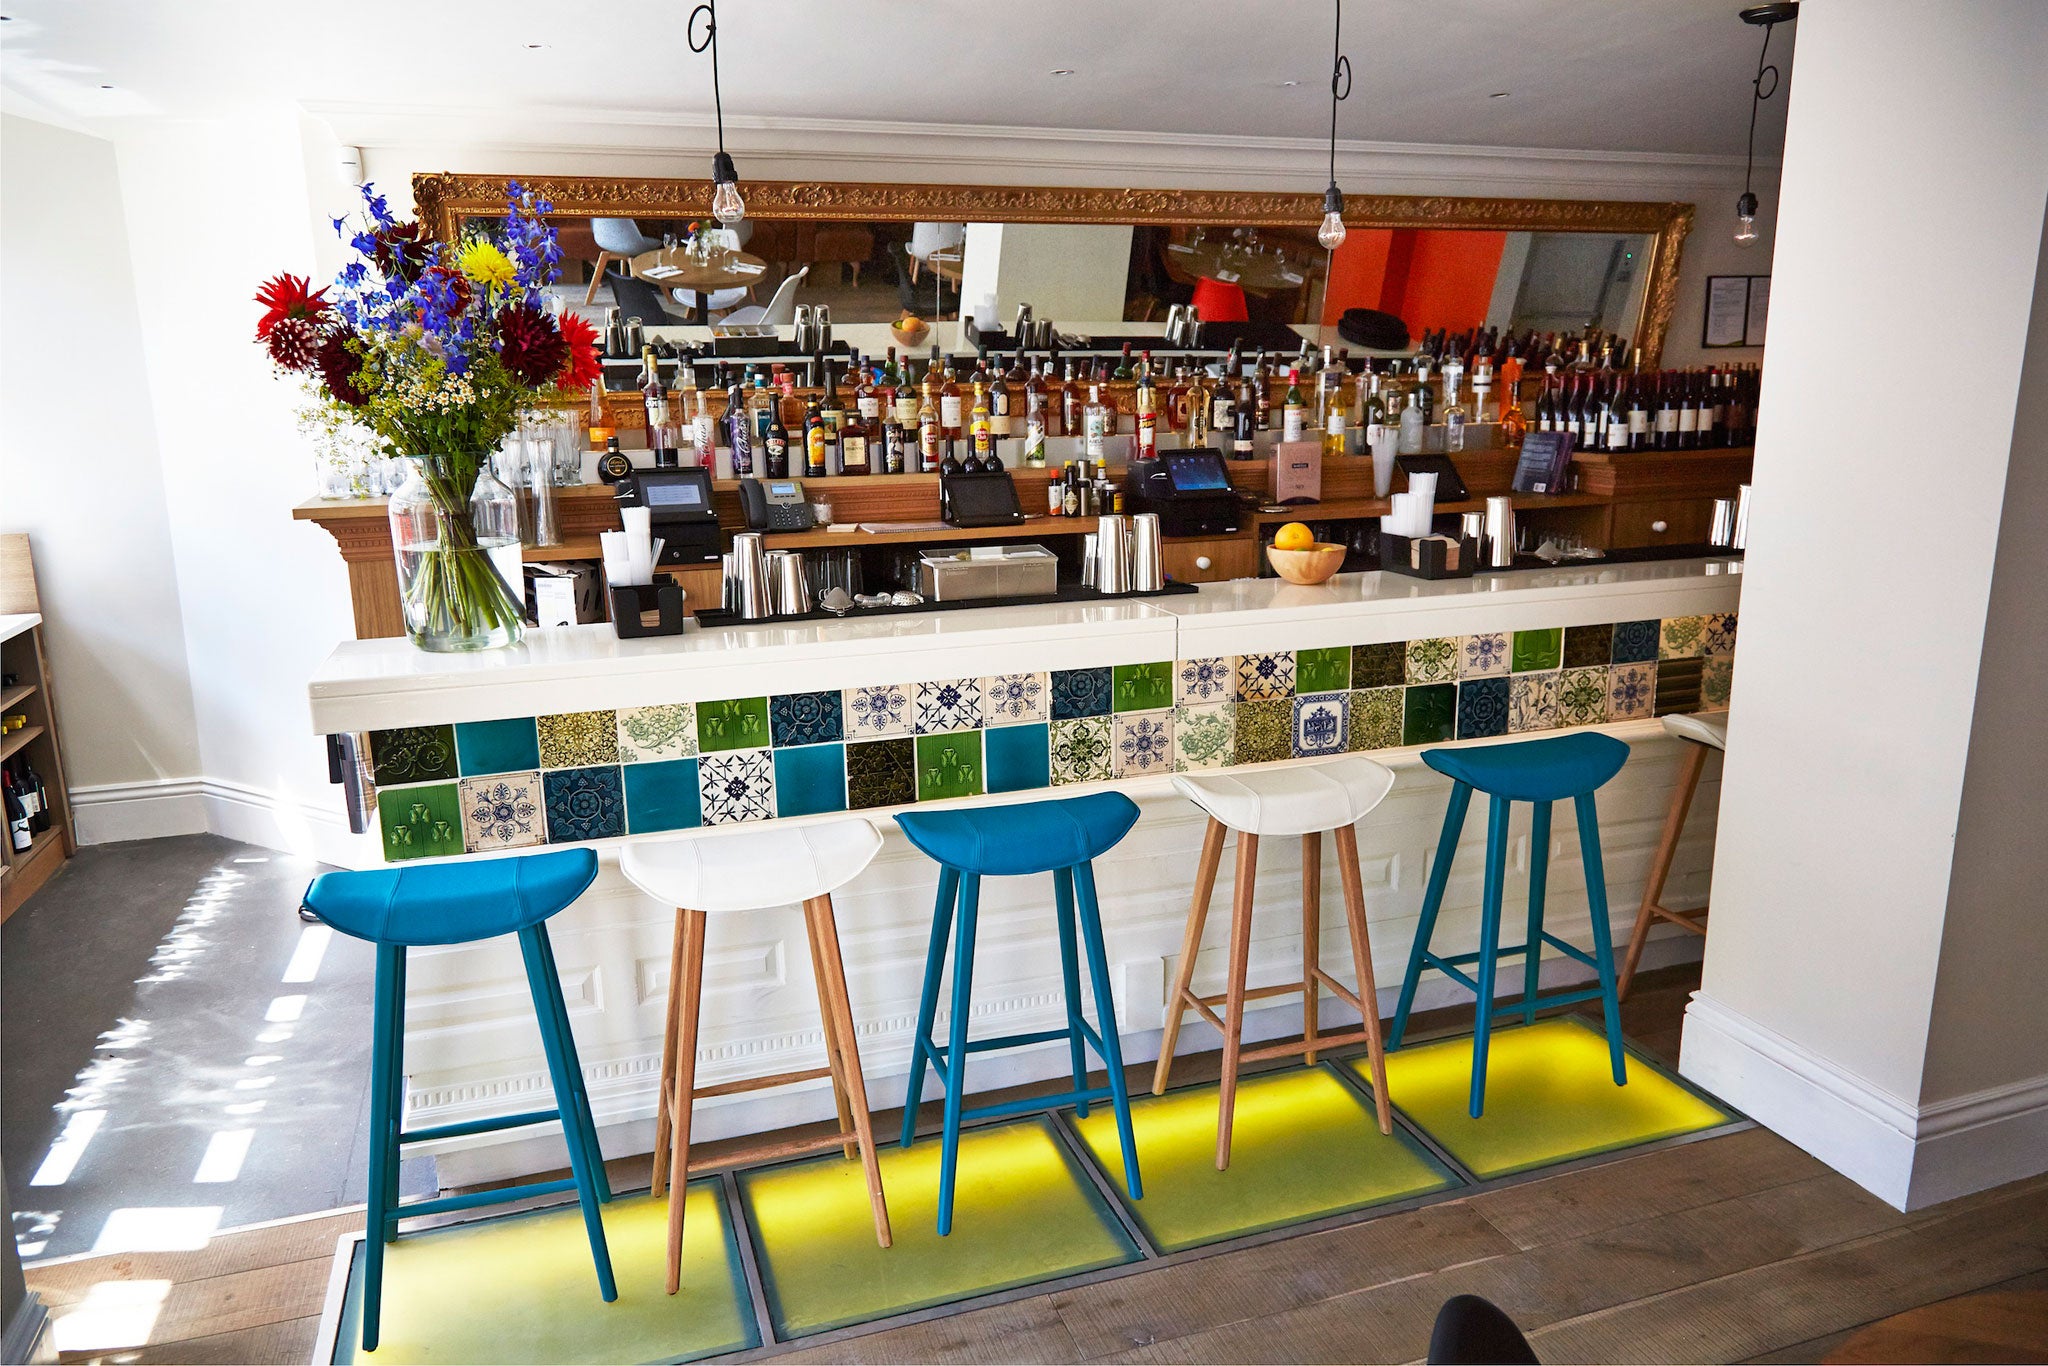 TED has spawned a restaurant on Caledonian Road in breezy premises of bright colours and stripped wooden floorboards